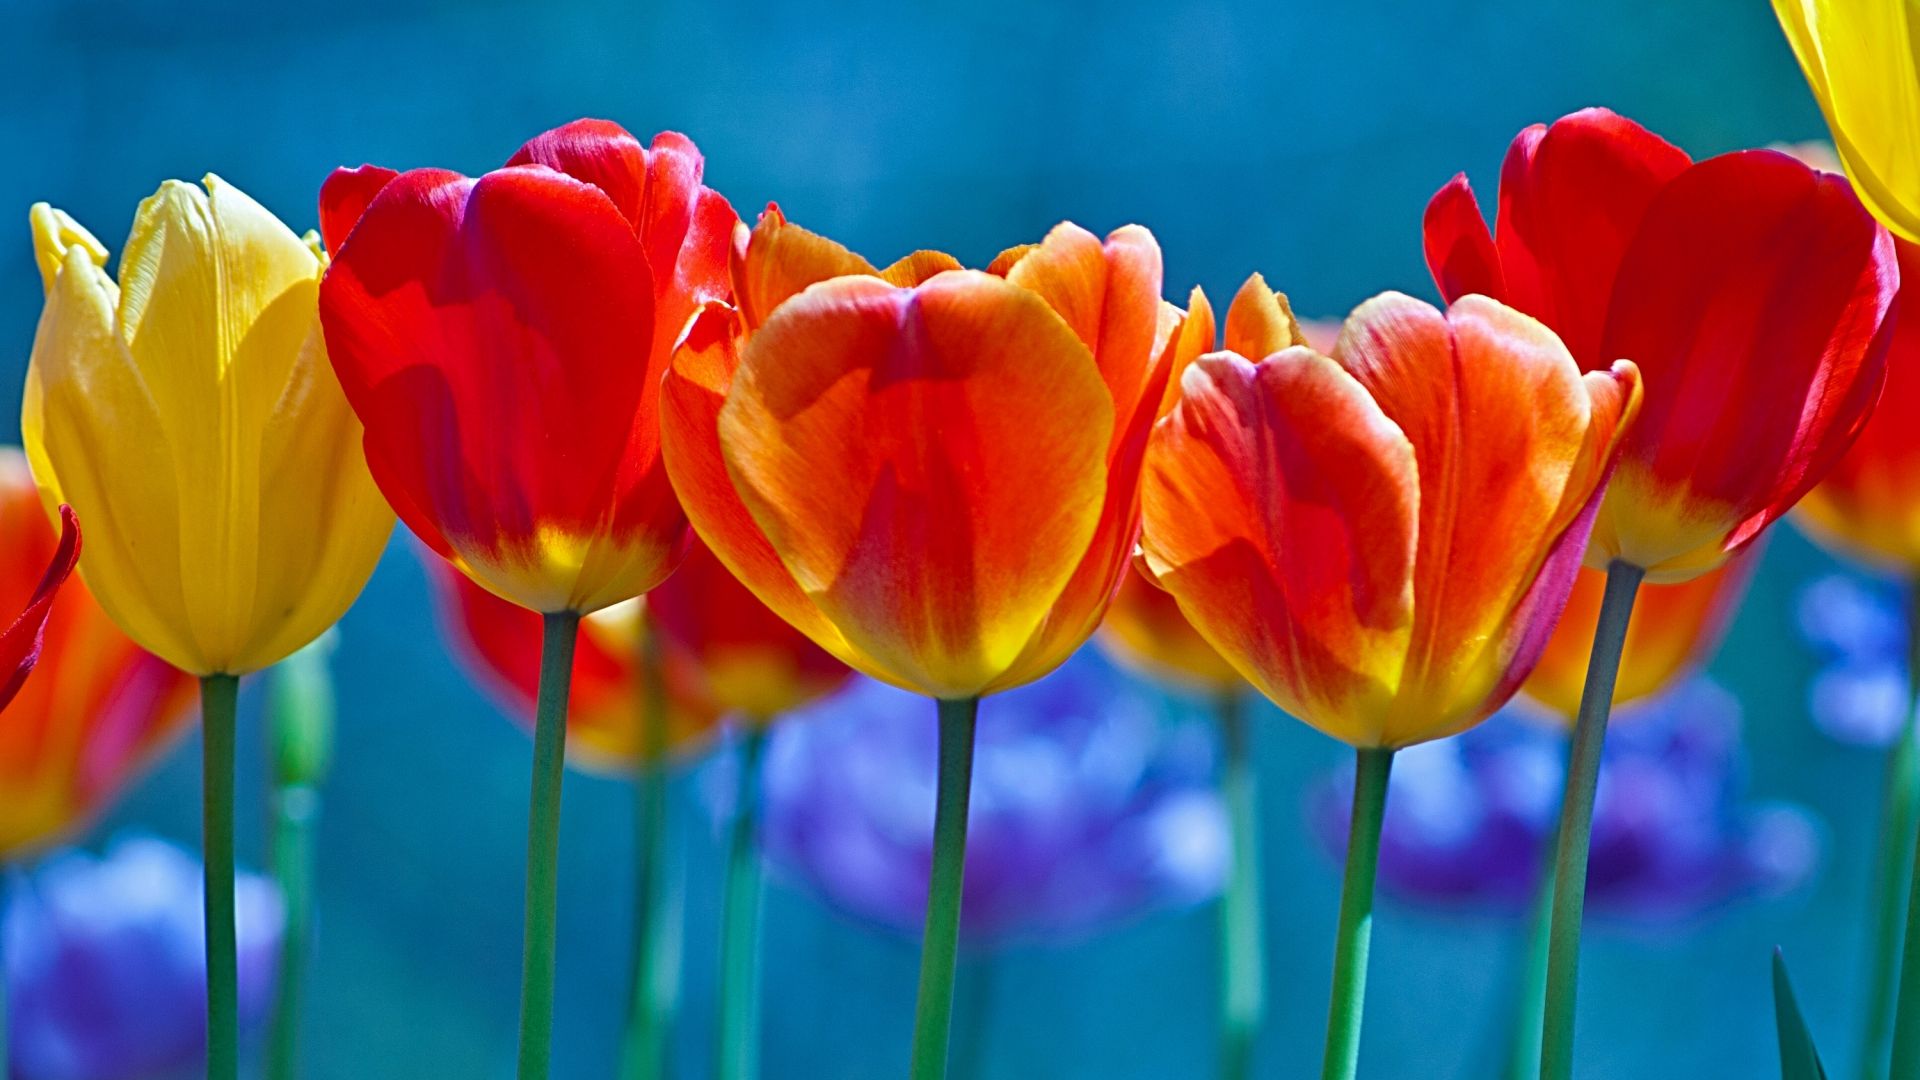 Wallpaper Tulip buds, flowers, colorful